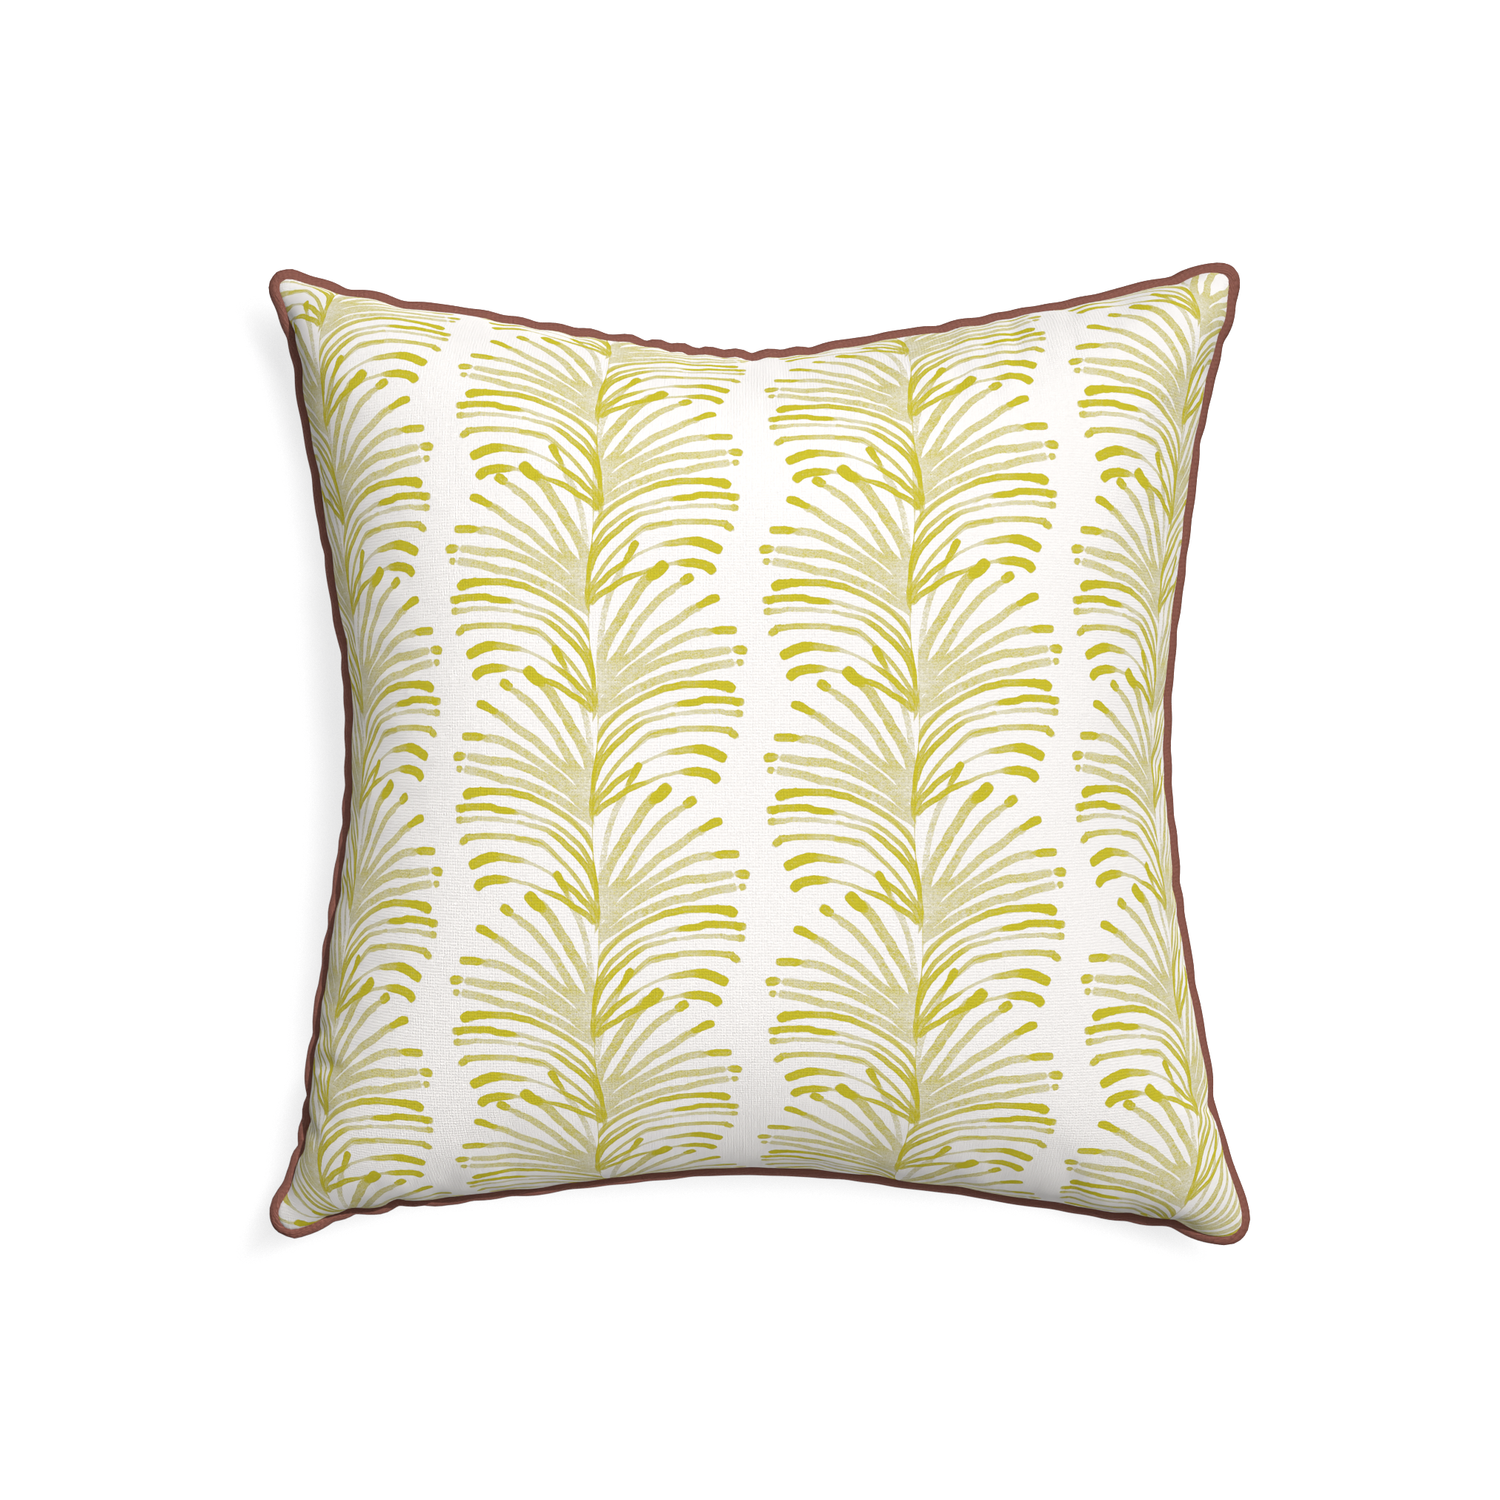 22-square emma chartreuse custom yellow stripe chartreusepillow with w piping on white background